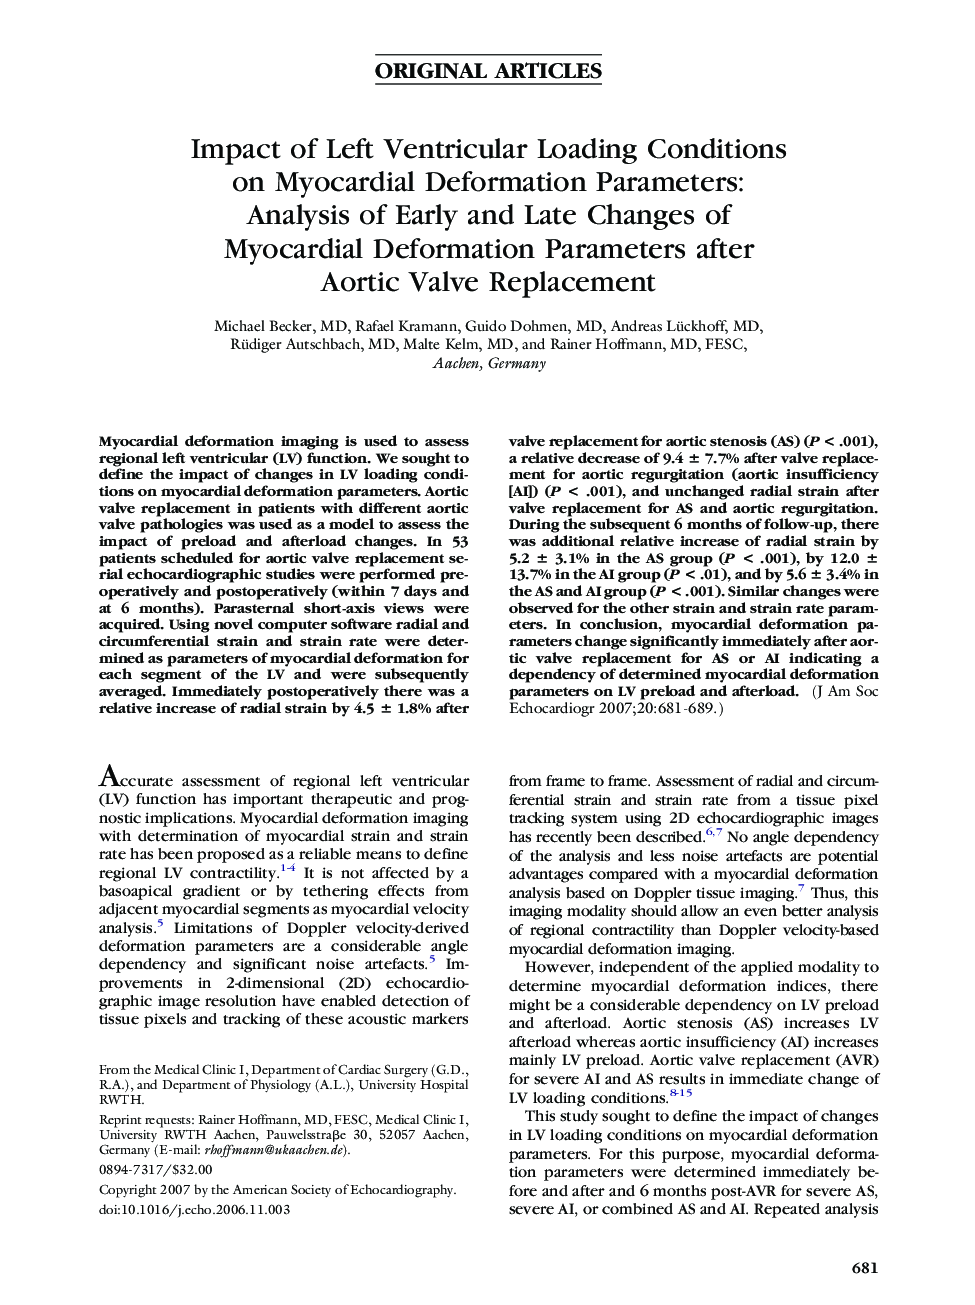 Impact of Left Ventricular Loading Conditions on Myocardial Deformation Parameters: Analysis of Early and Late Changes of Myocardial Deformation Parameters after Aortic Valve Replacement